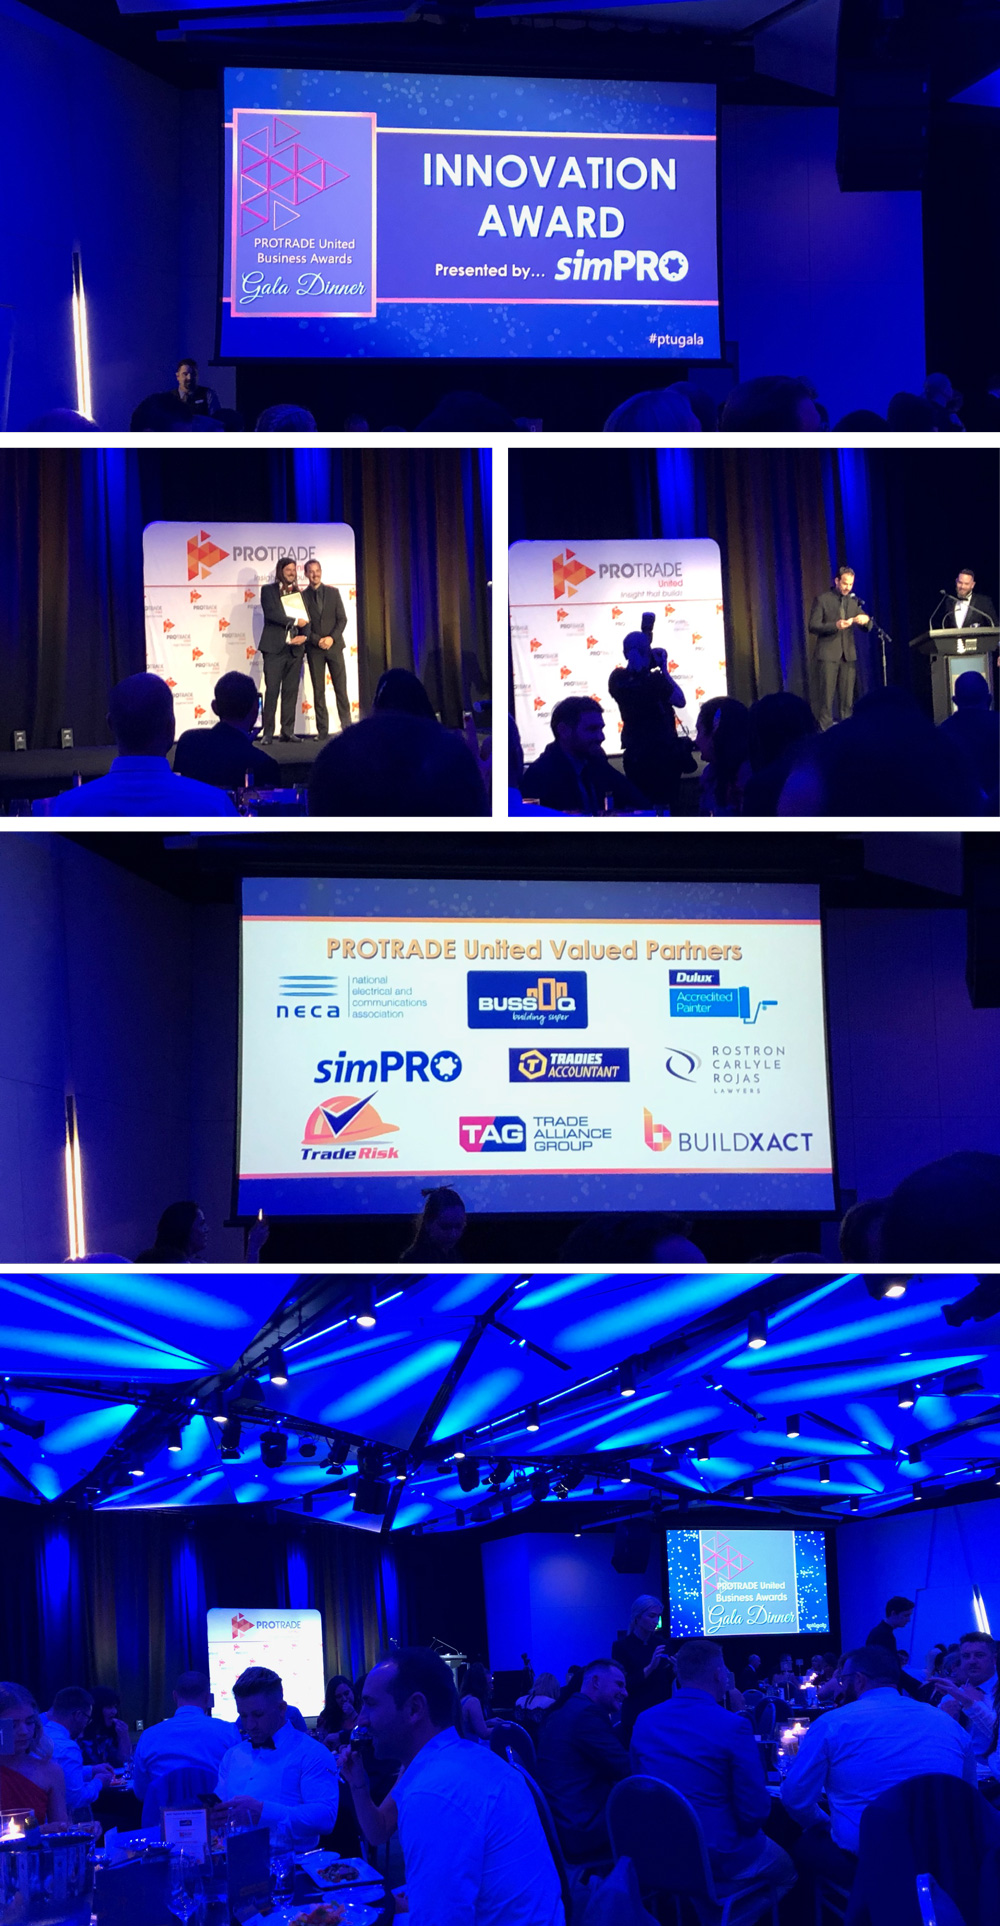 Collage of images from the Protrade United Awards Gala